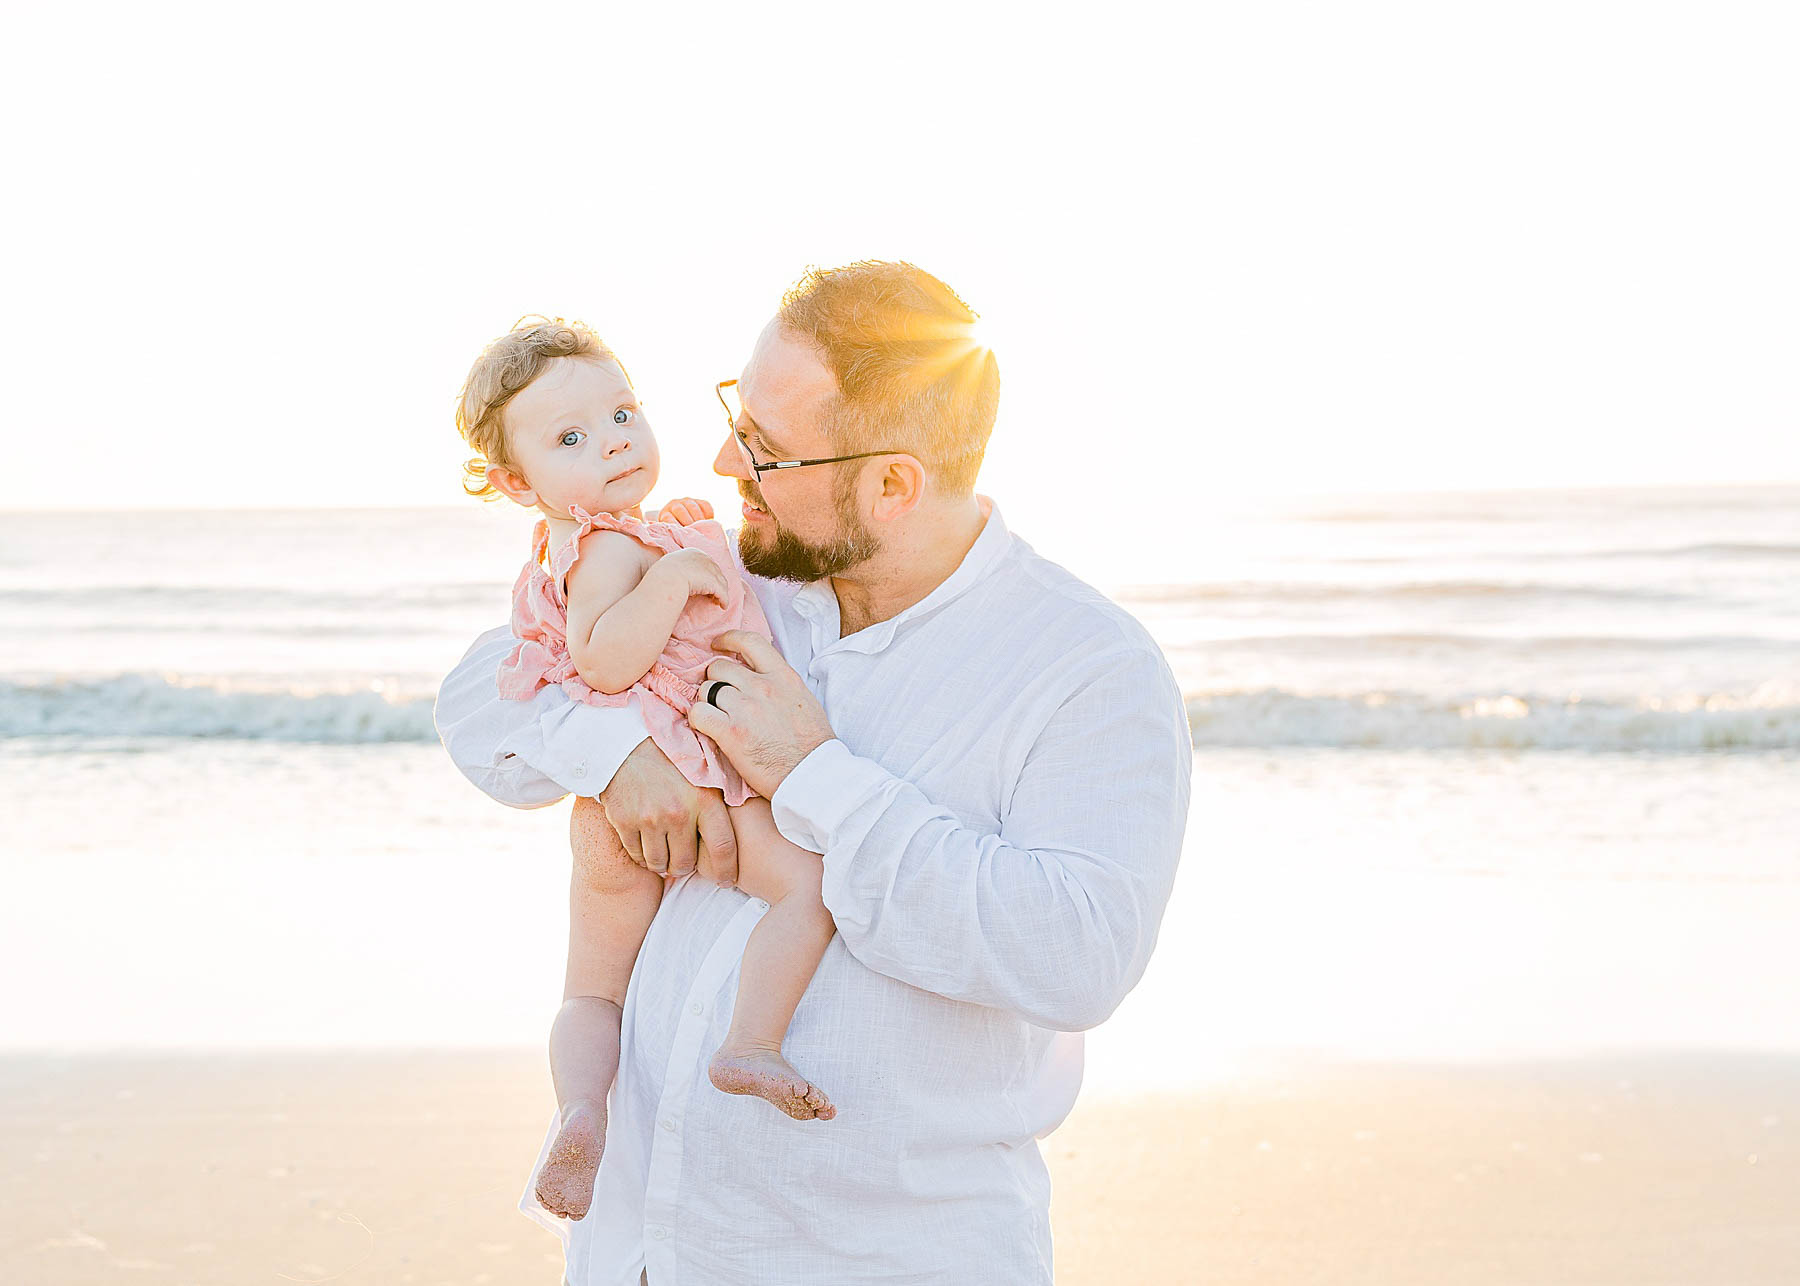 man holding baby wearing a pink dress on the beach at sunrise